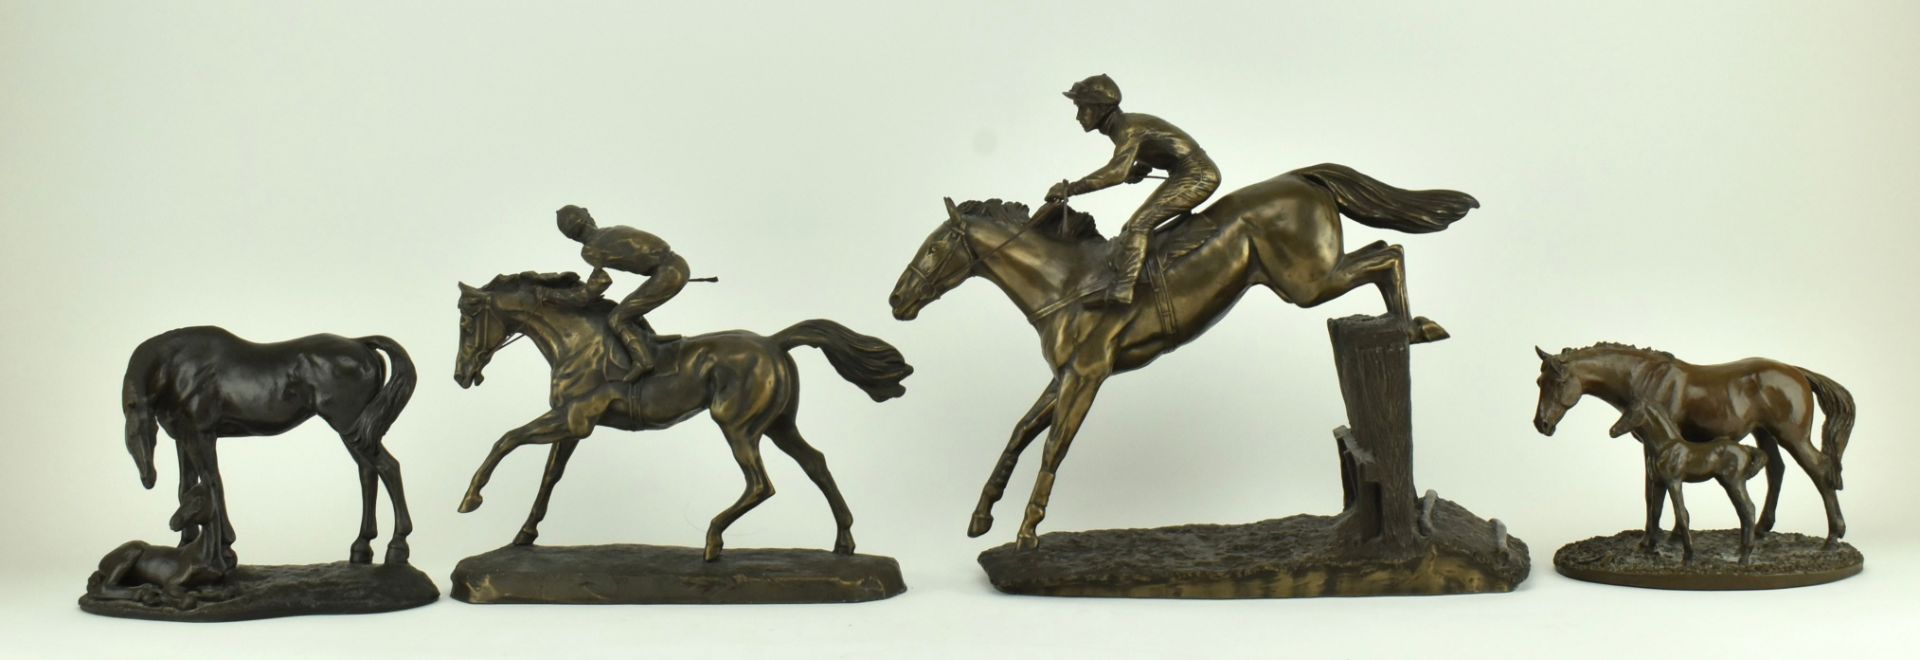 COLLECTION OF HEREDITIES LIMITED EDITION HORSE BRONZES